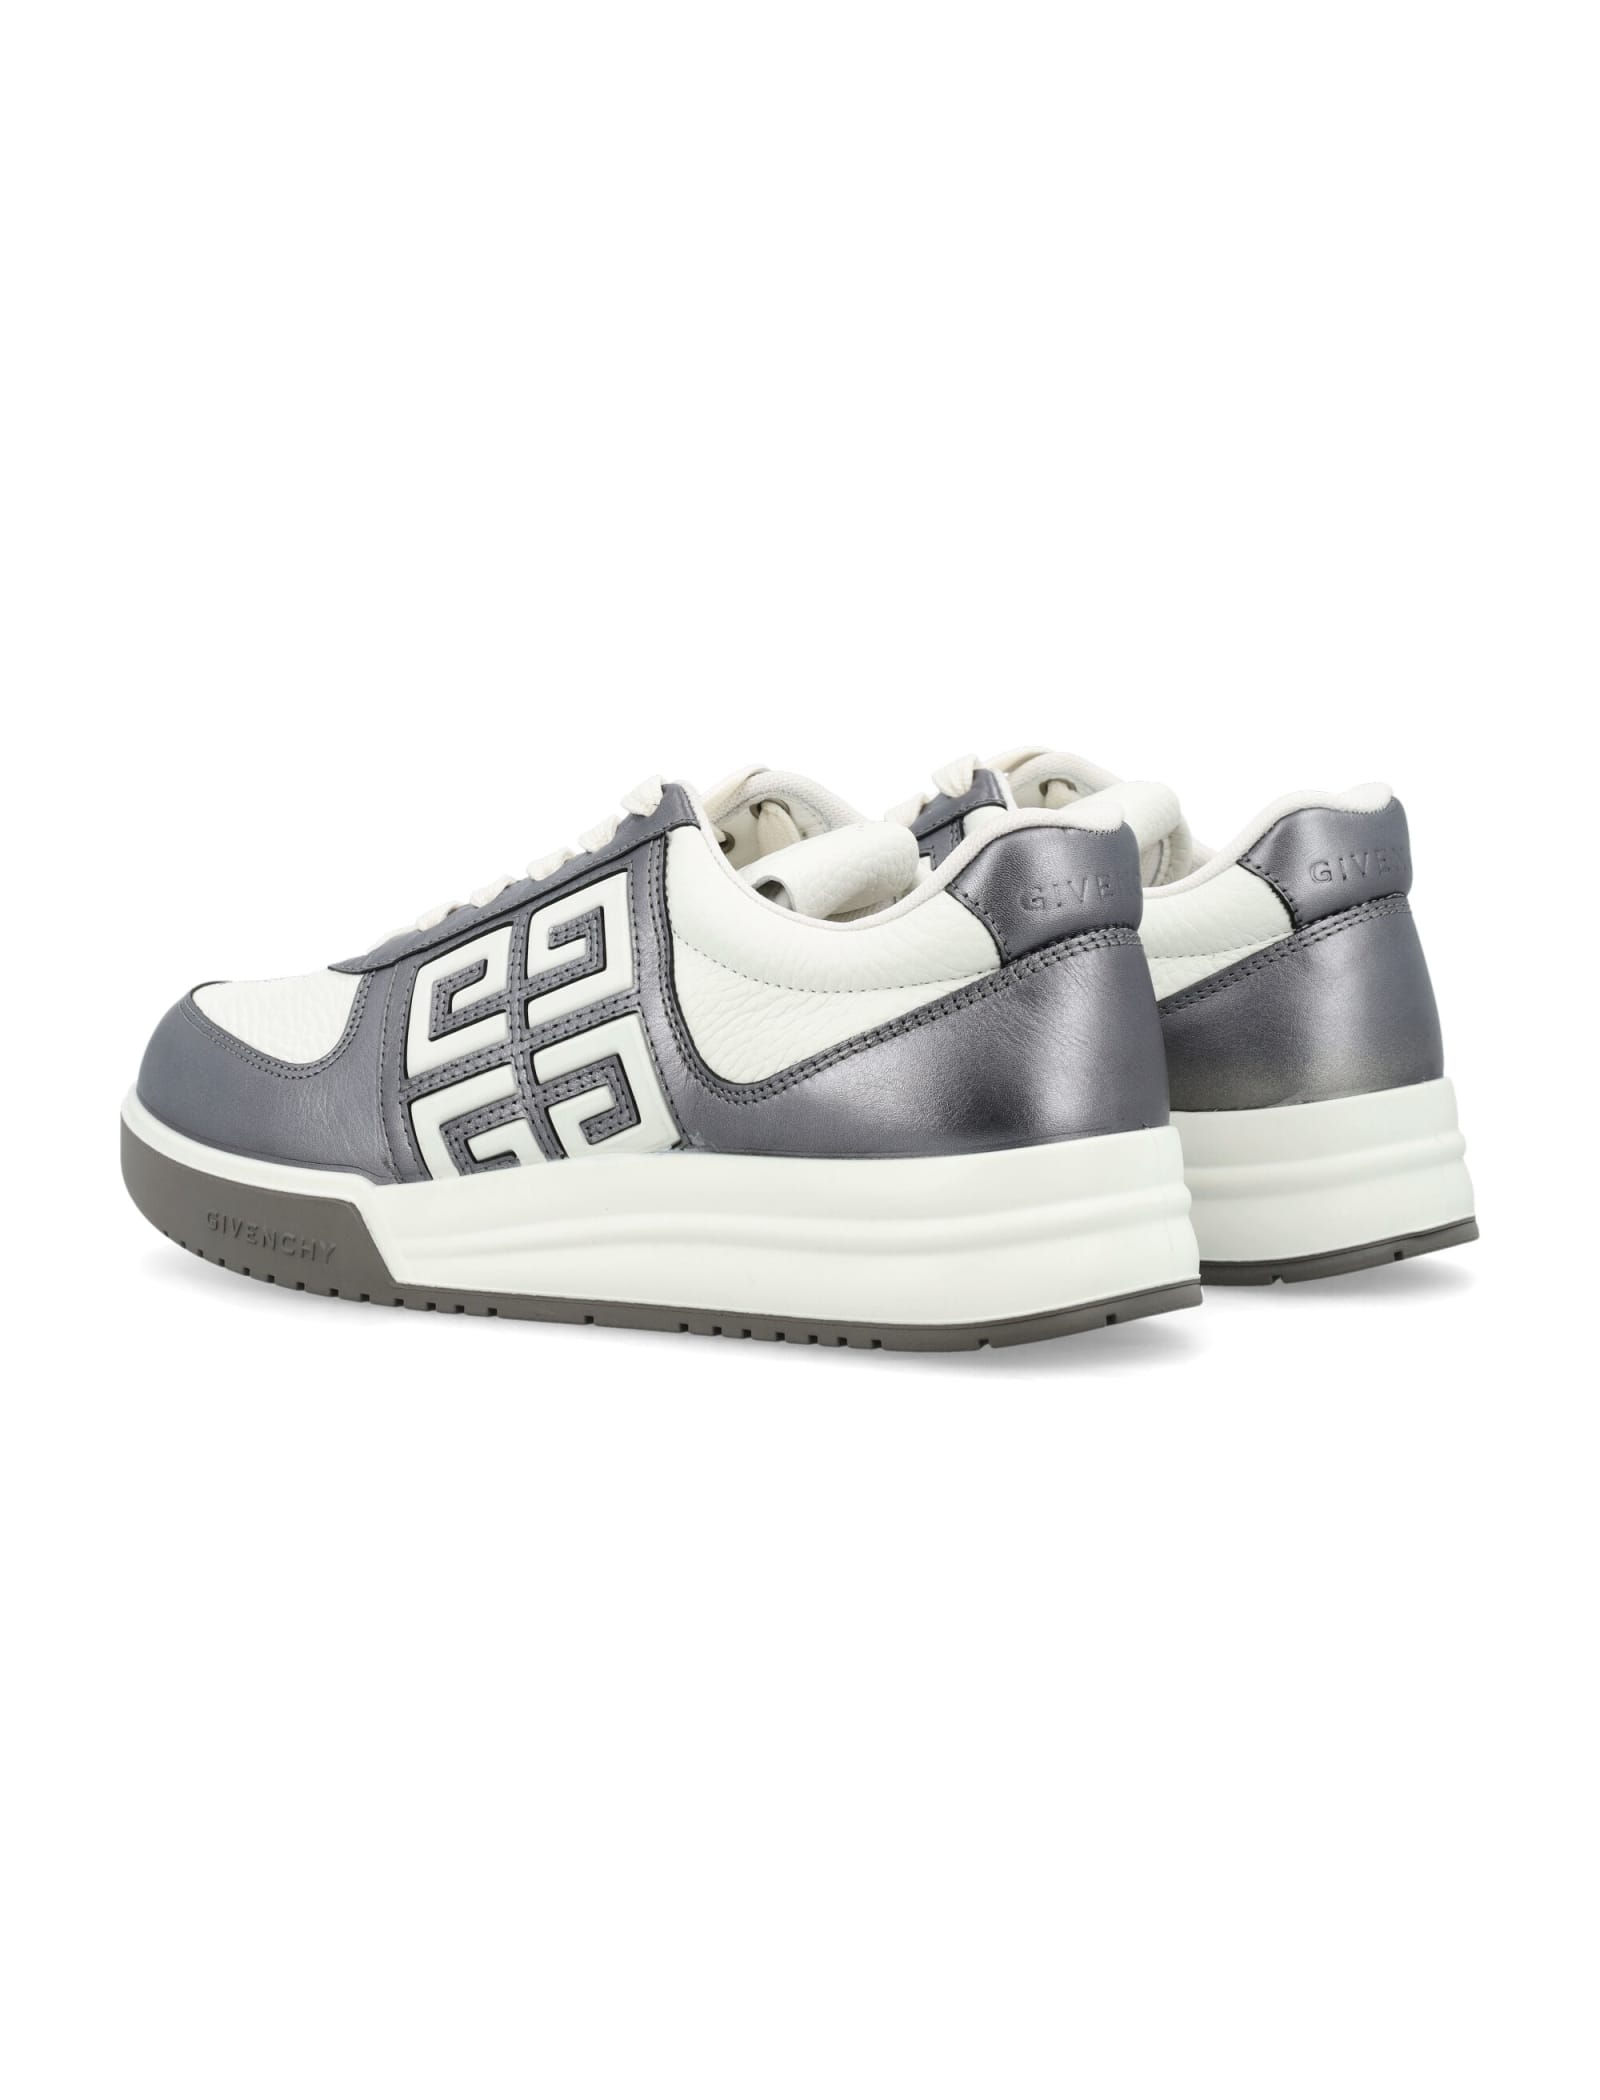 Shop Givenchy G4 Womans Sneakers In White/silvery